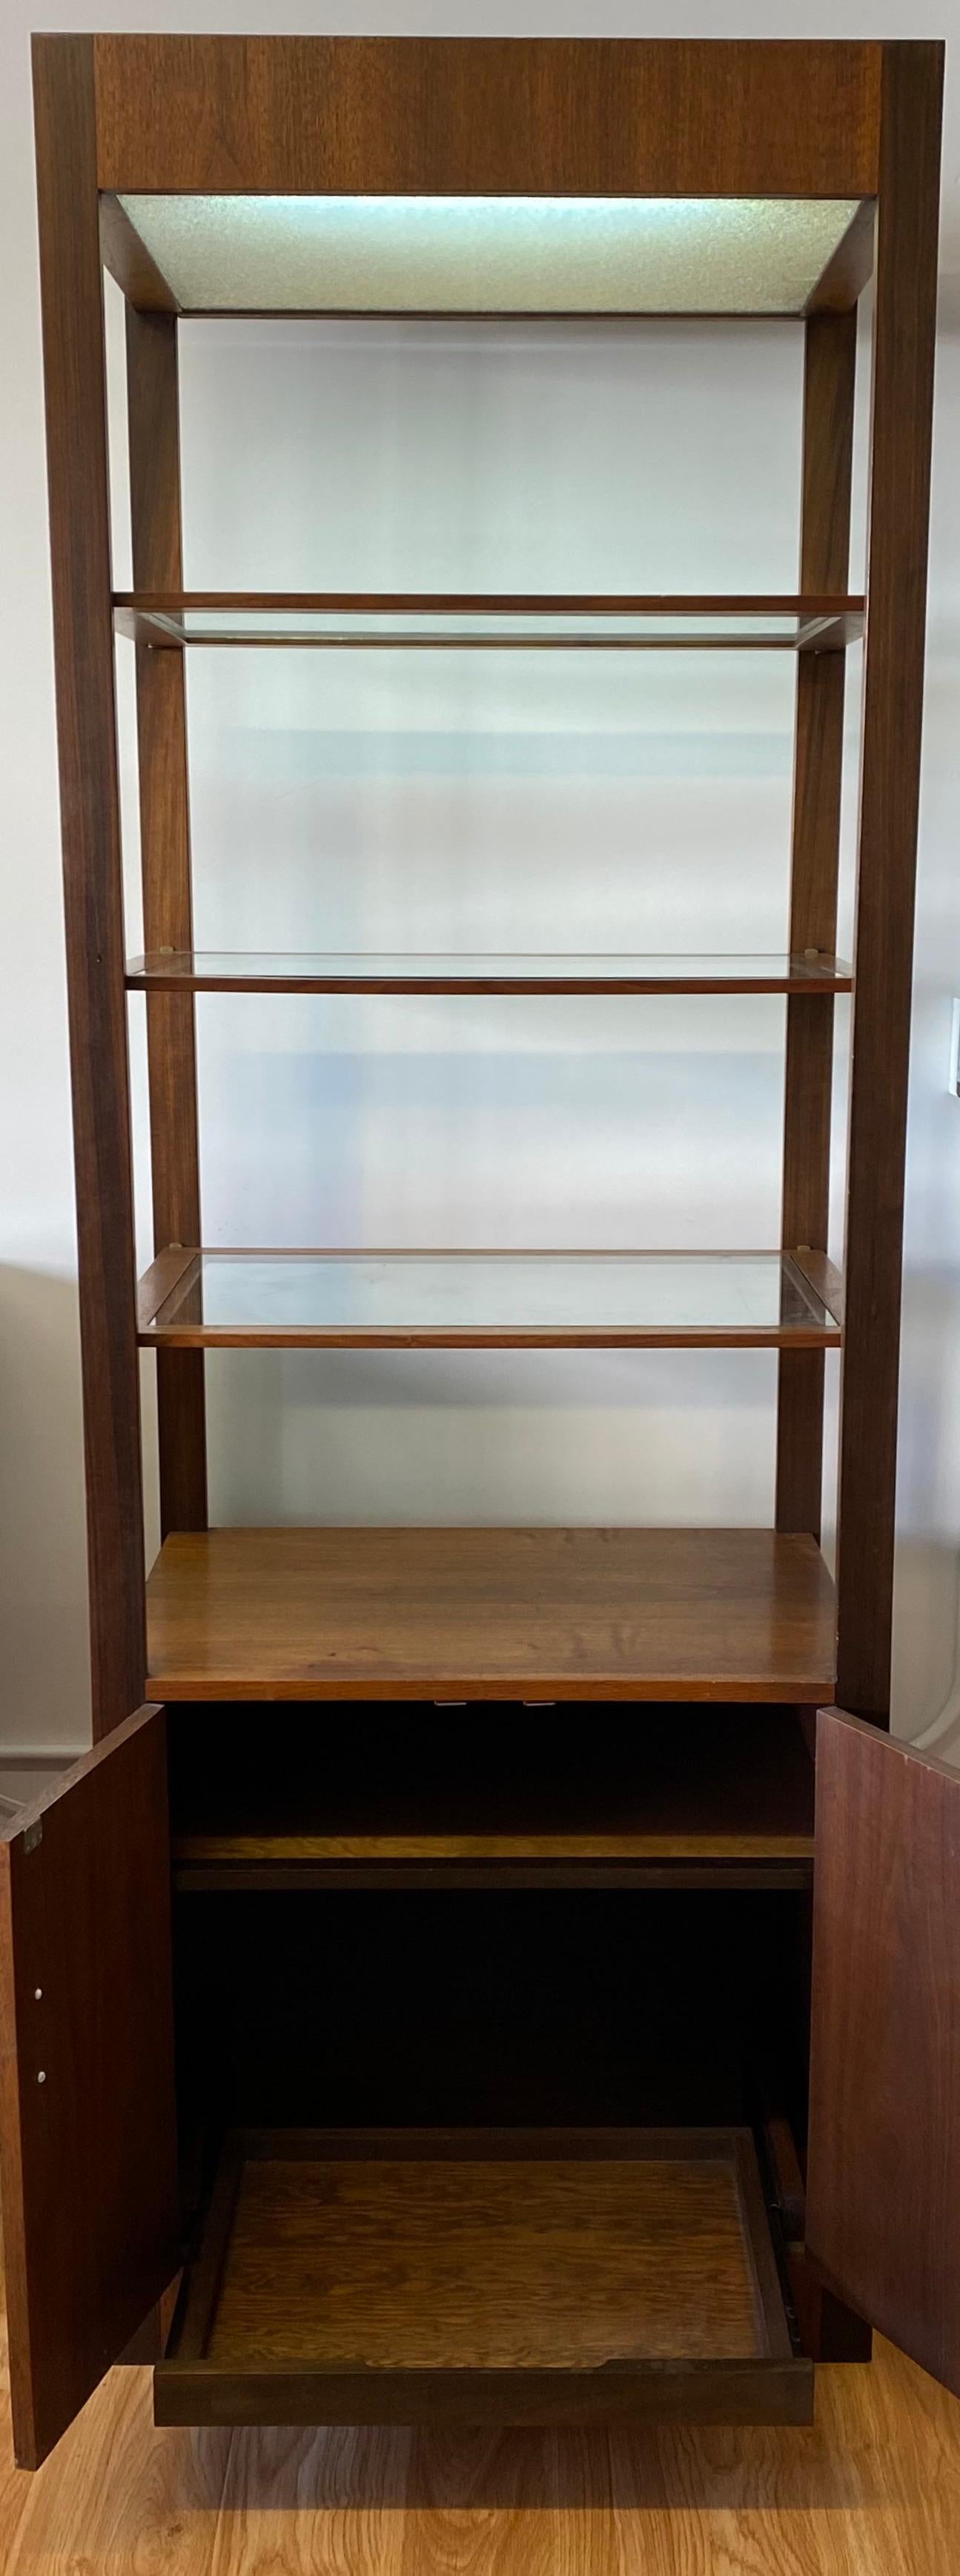 Danish modern walnut cabinet with glass shelves and lighting, circa 1960

Handsome midcentury free standing shelves with lower cabinet and an upper ceiling light

Wired for US outlets

The lower cabinet has a pull-out shelf and mother of pearl